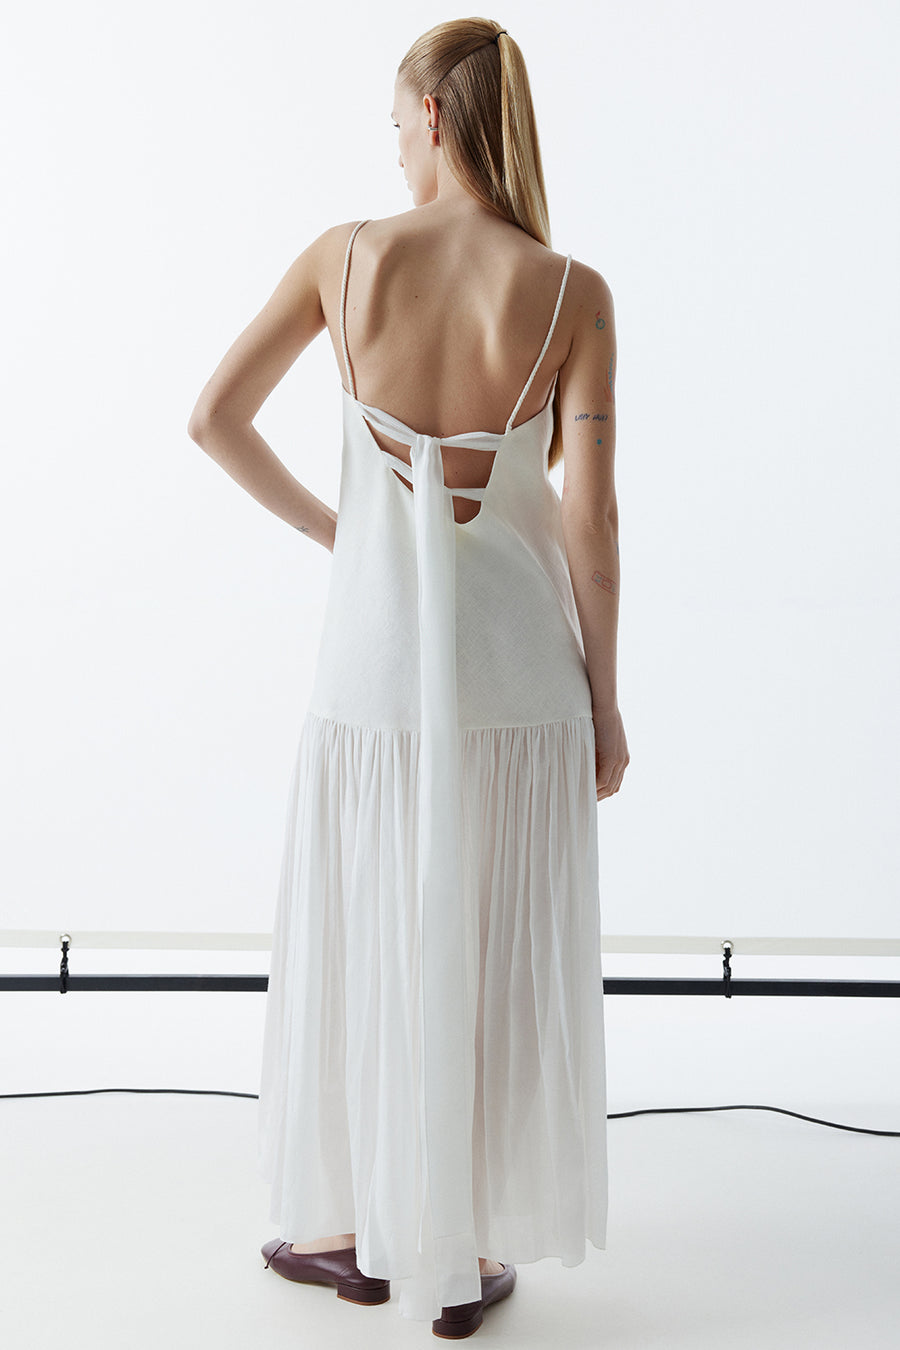 Sundress with an open back and sheer detailing